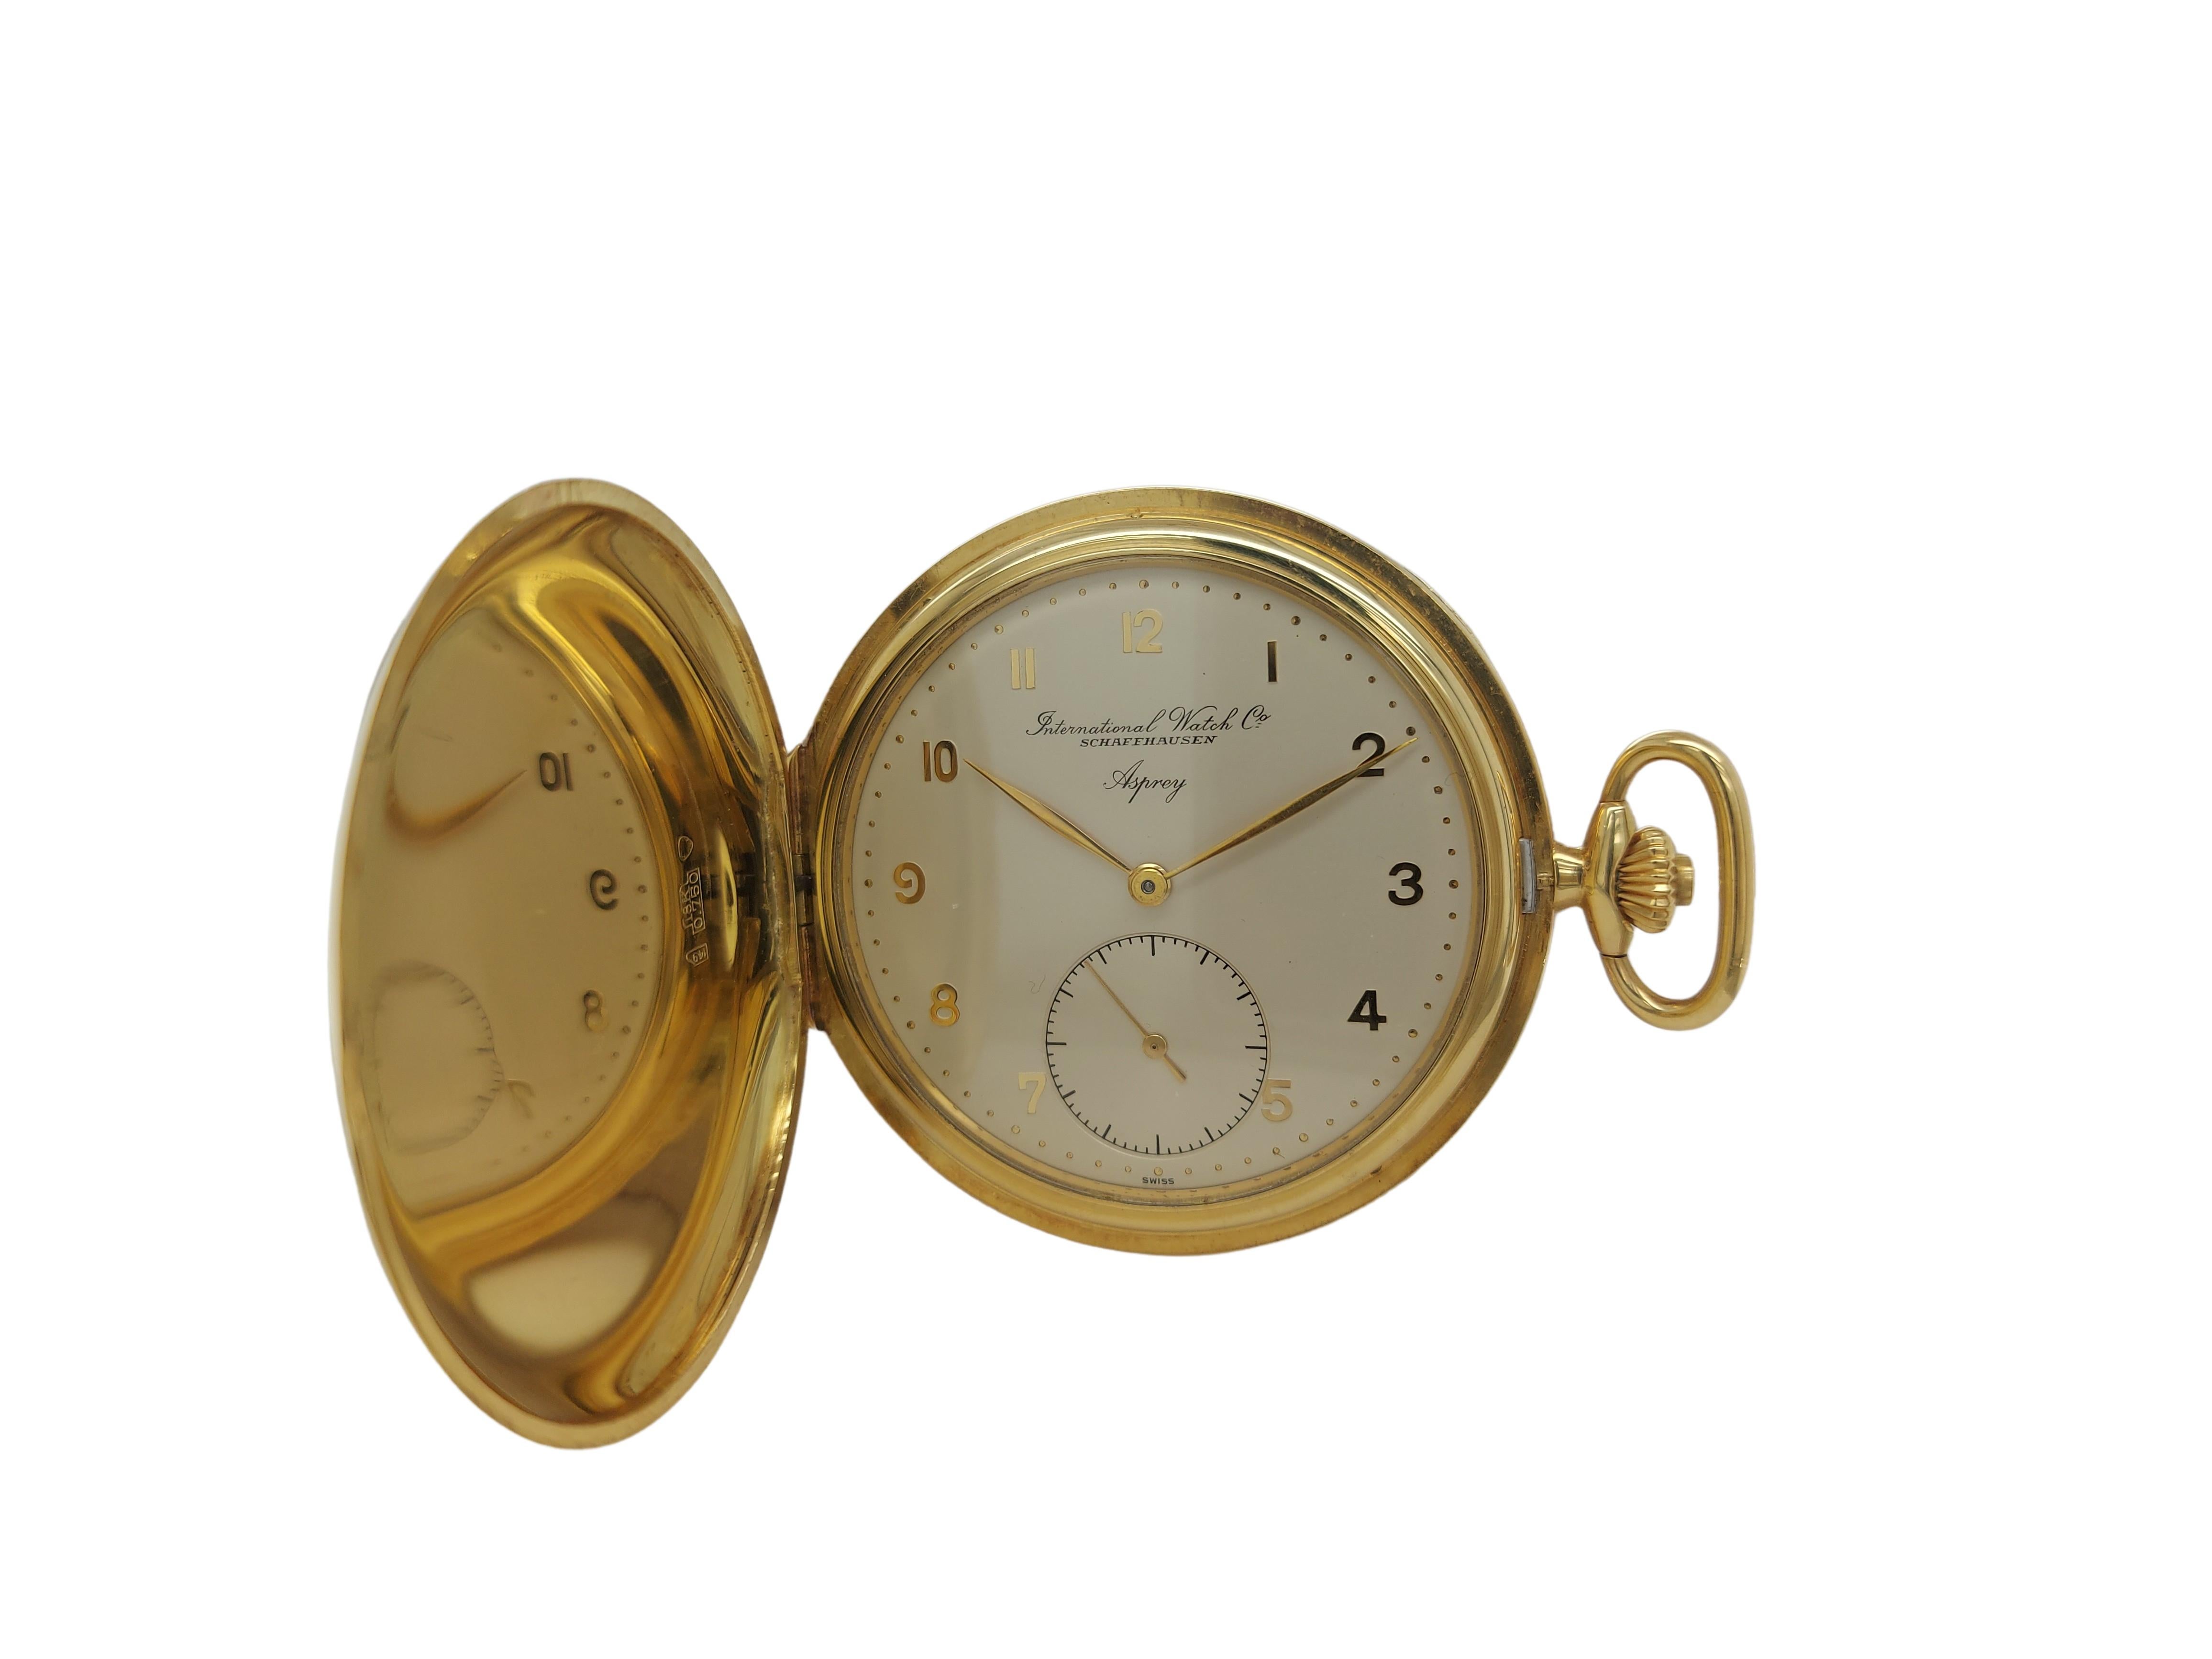 Unique Beautiful and Collectable IWC Savonette/Hunting Case Pocket watch made For Asprey.

49mm 18k yellow gold hunting case with double caseback.

Ivory dial with large Arabic numerals and small seconds at 6 o'clock.

Gold lance hands,